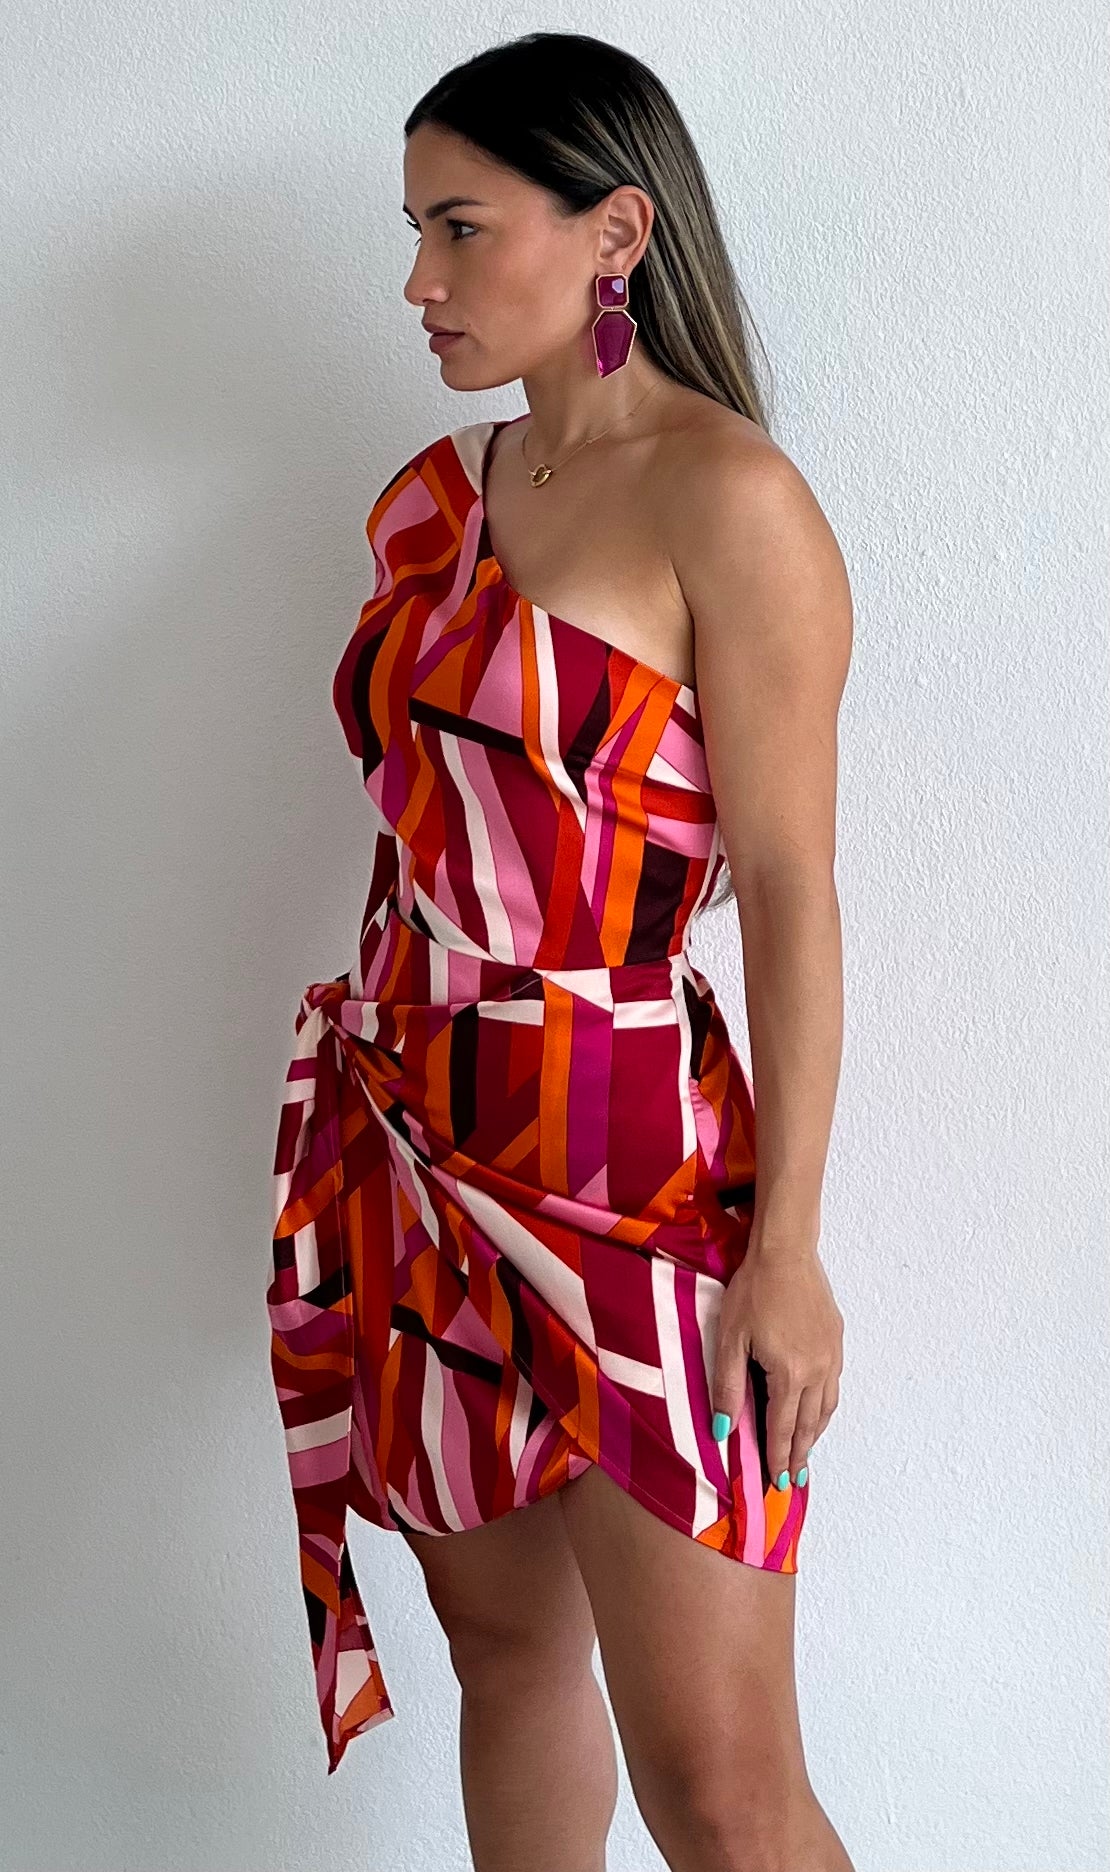 Lost in Your Eyes One-Shoulder Print Dress